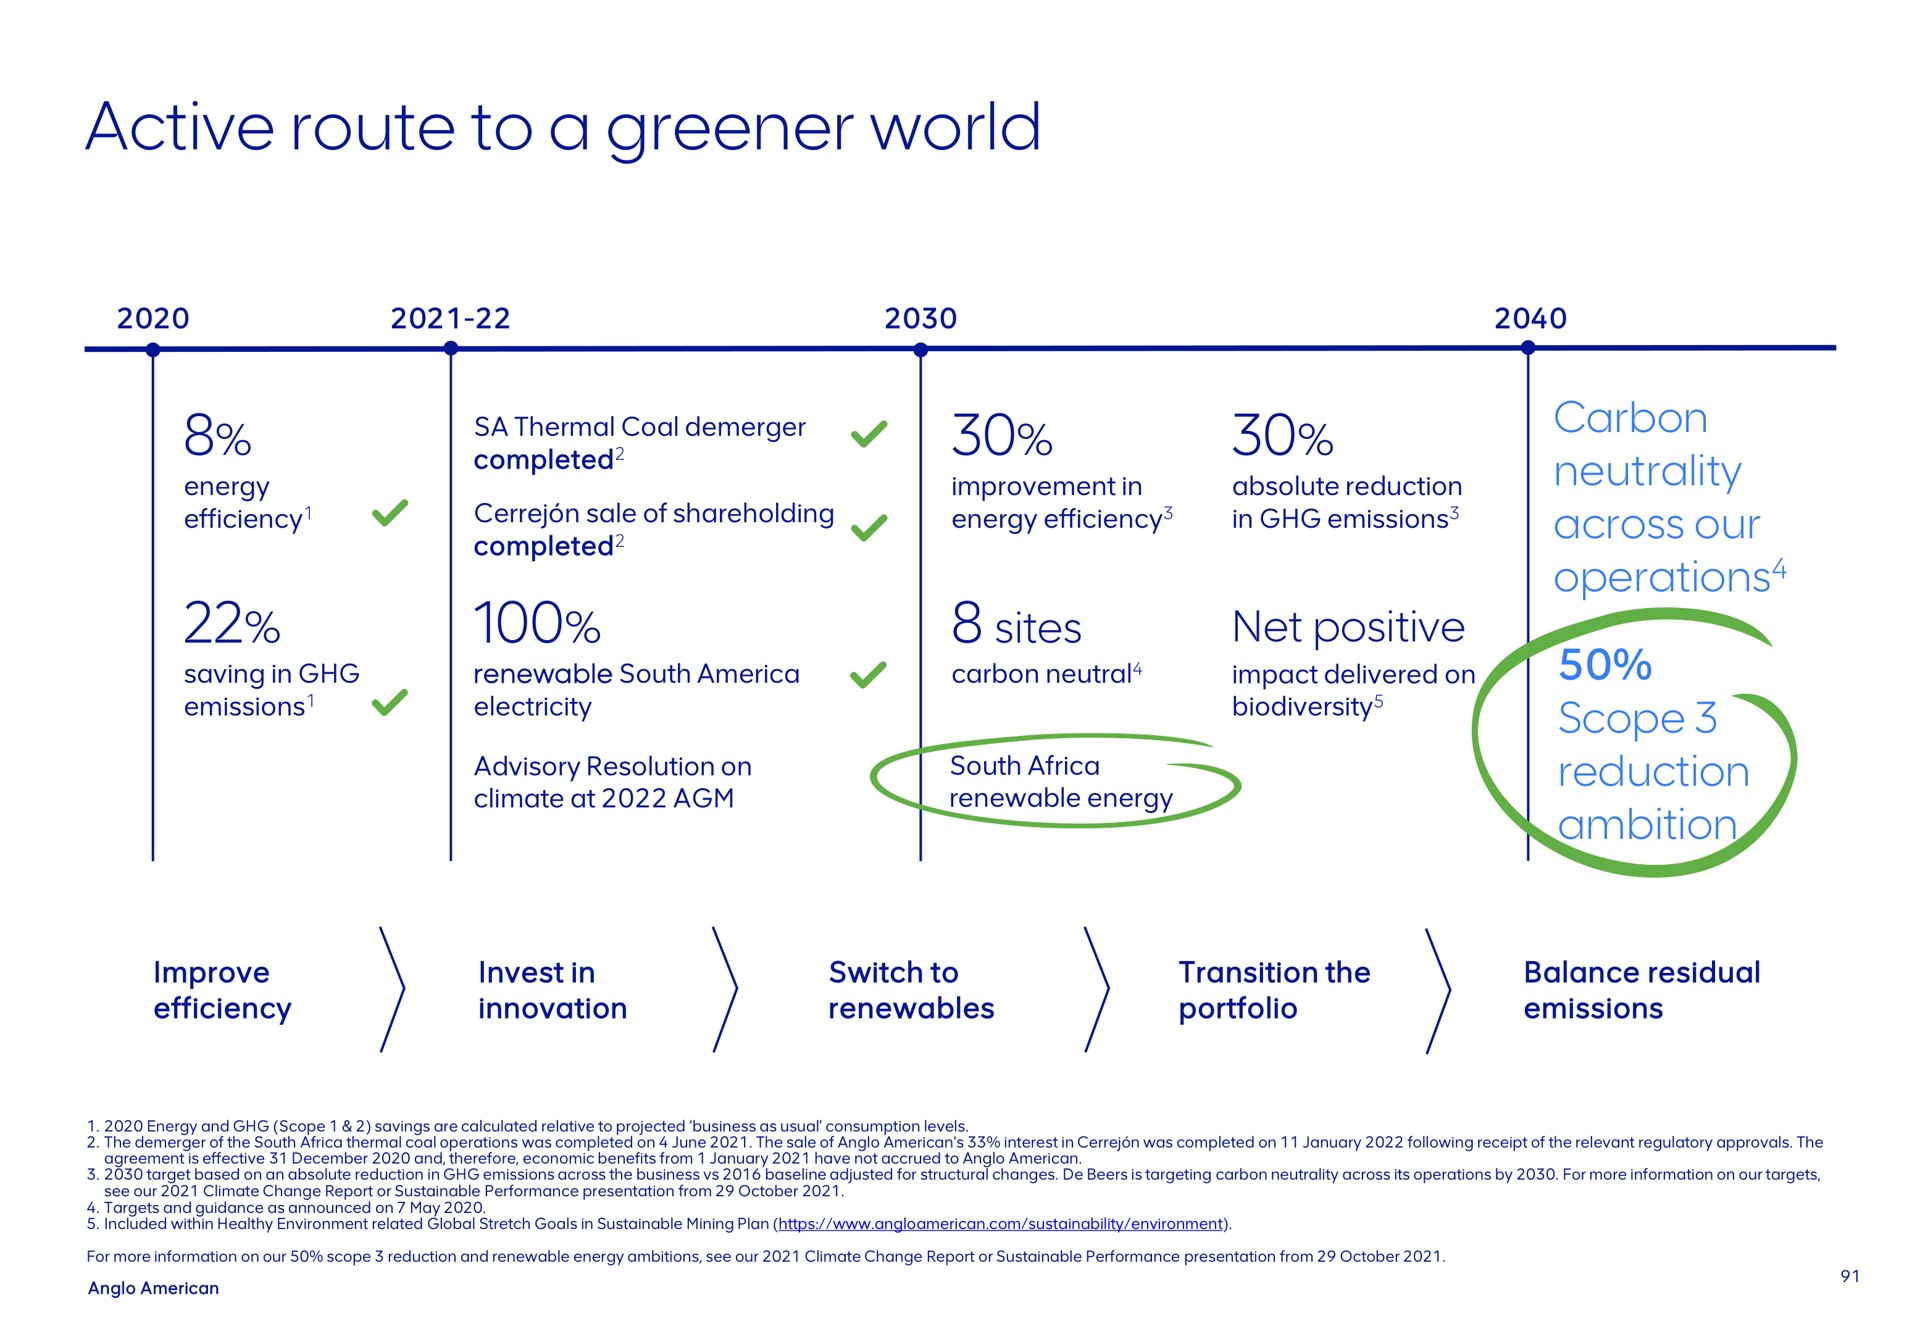 active route to a greener world | AngloAmerican